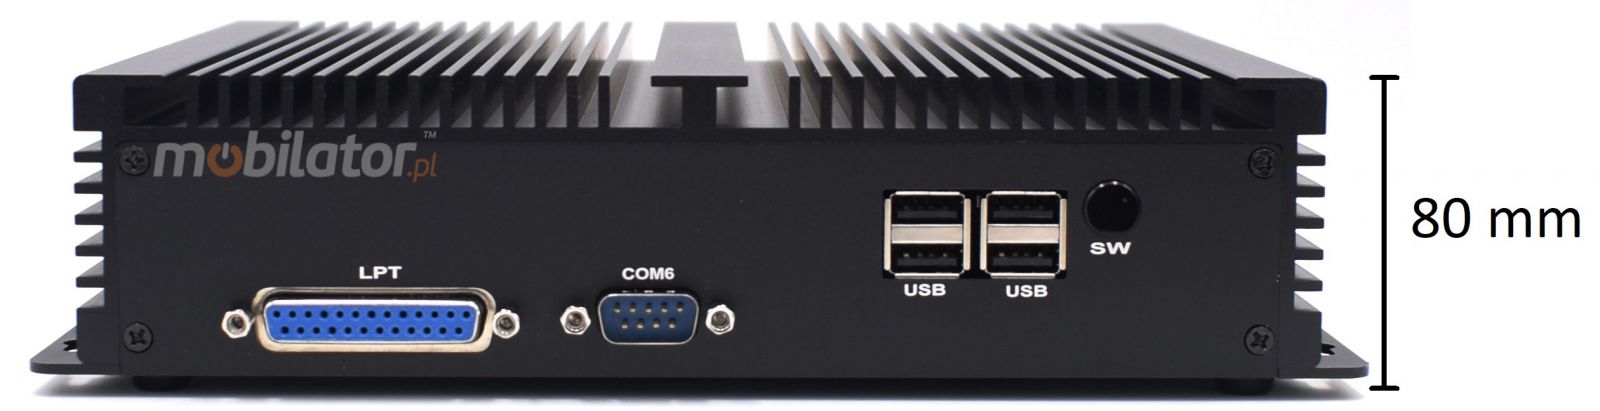 HyBOX H4 Intel i7 efficient universal and specialized industrial computer for wholesalers with small dimensions